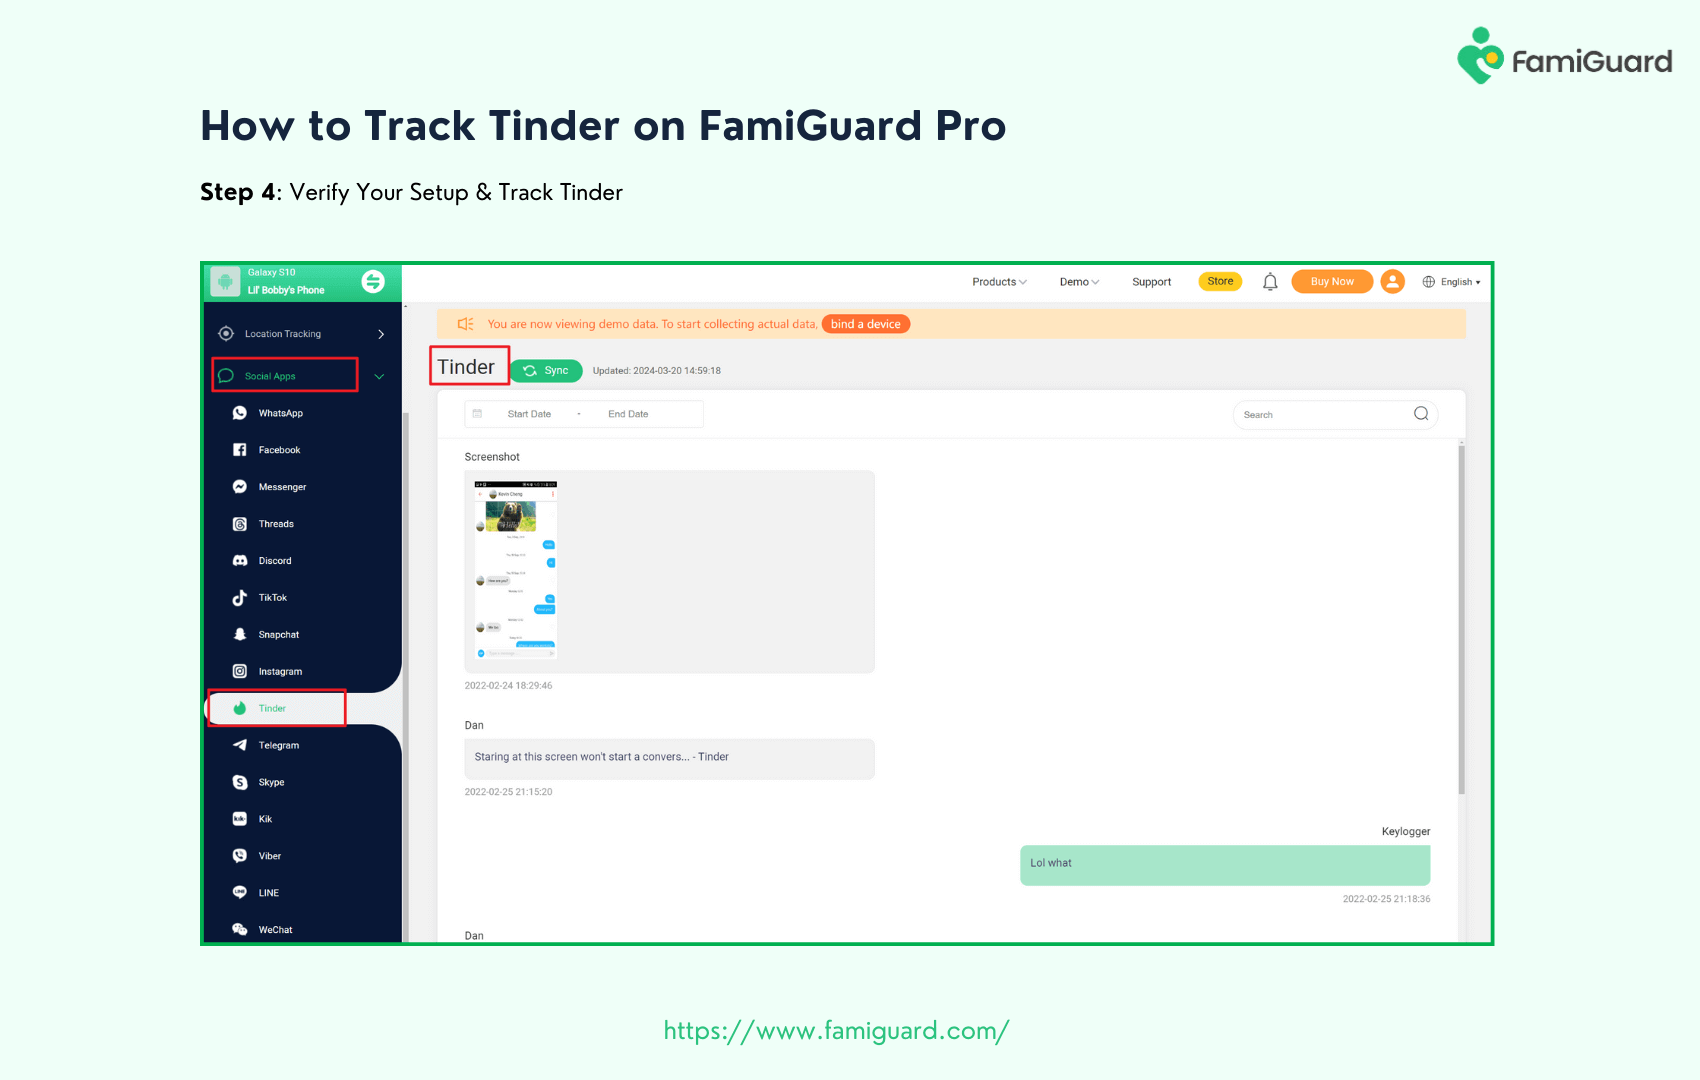 How to Track Tinder on FamiGuard Pro